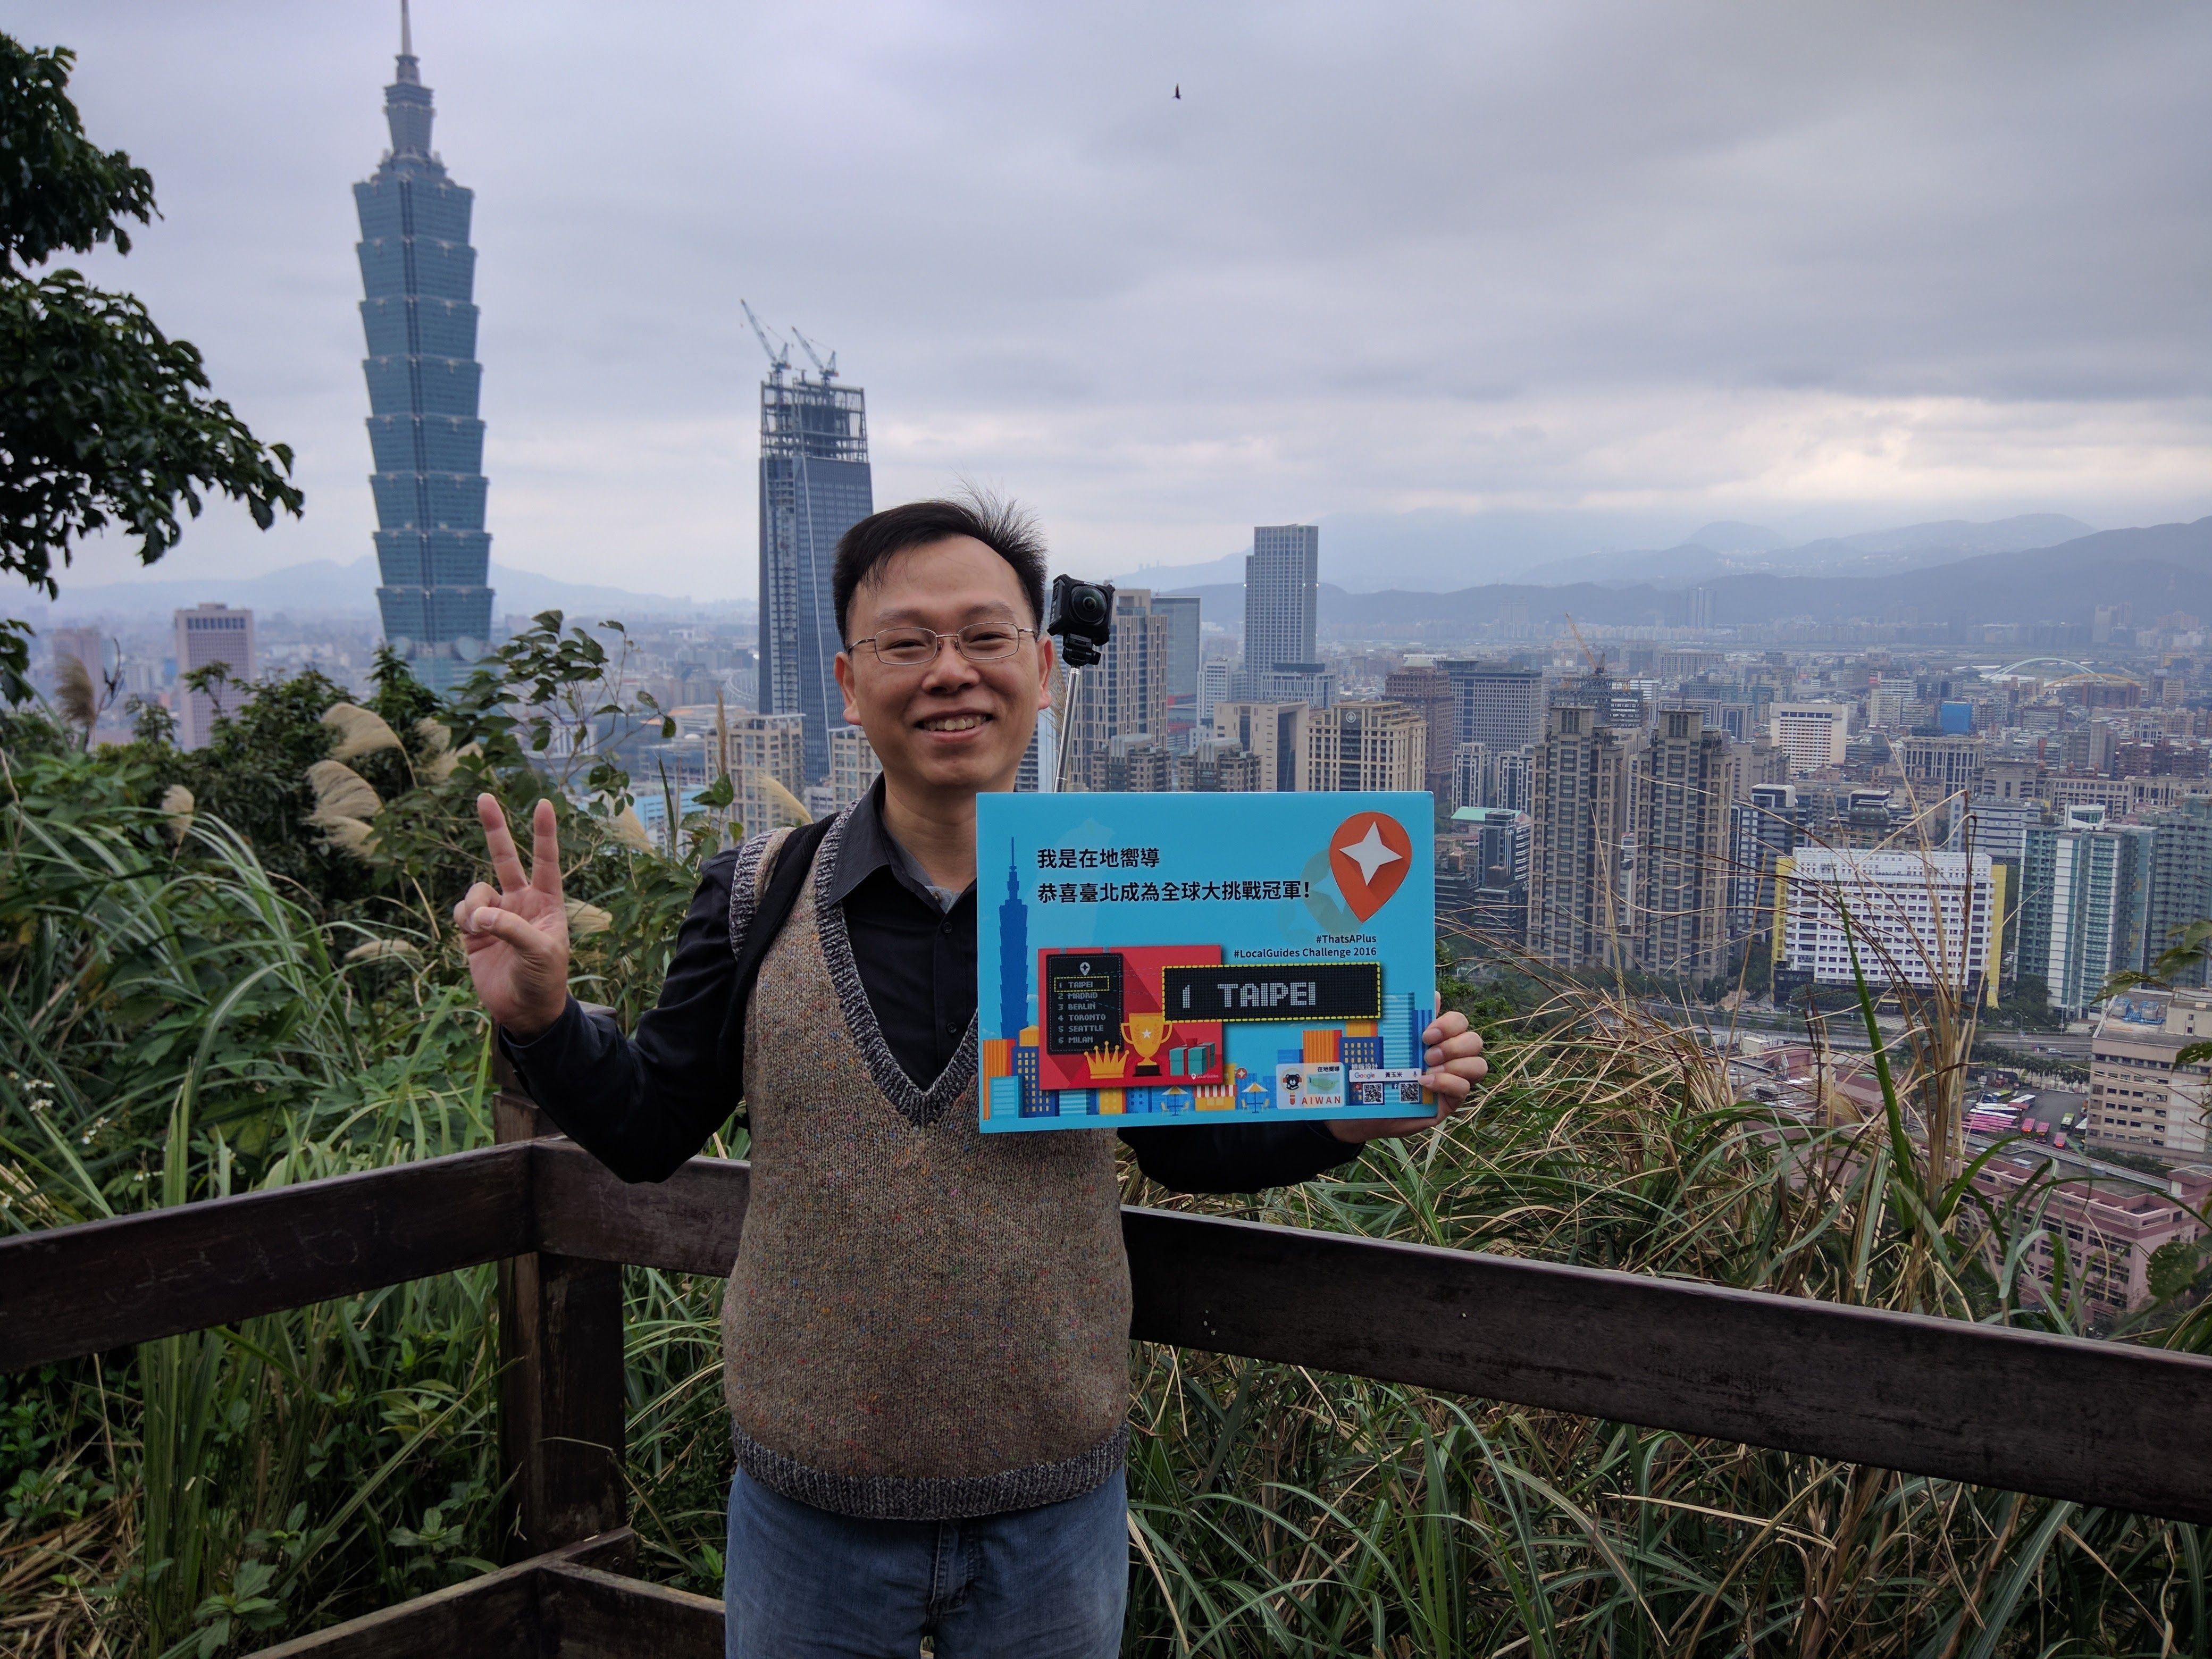 Caption: A photo of Sampson on the Xiangshan Hiking Trail in January 2017. The sign celebrates Taipei’s victory in the LGChallenge 2016. The tallest building in Taiwan, the Taipei 101 Tower, is behind him. (Local Guide @SampsonF)